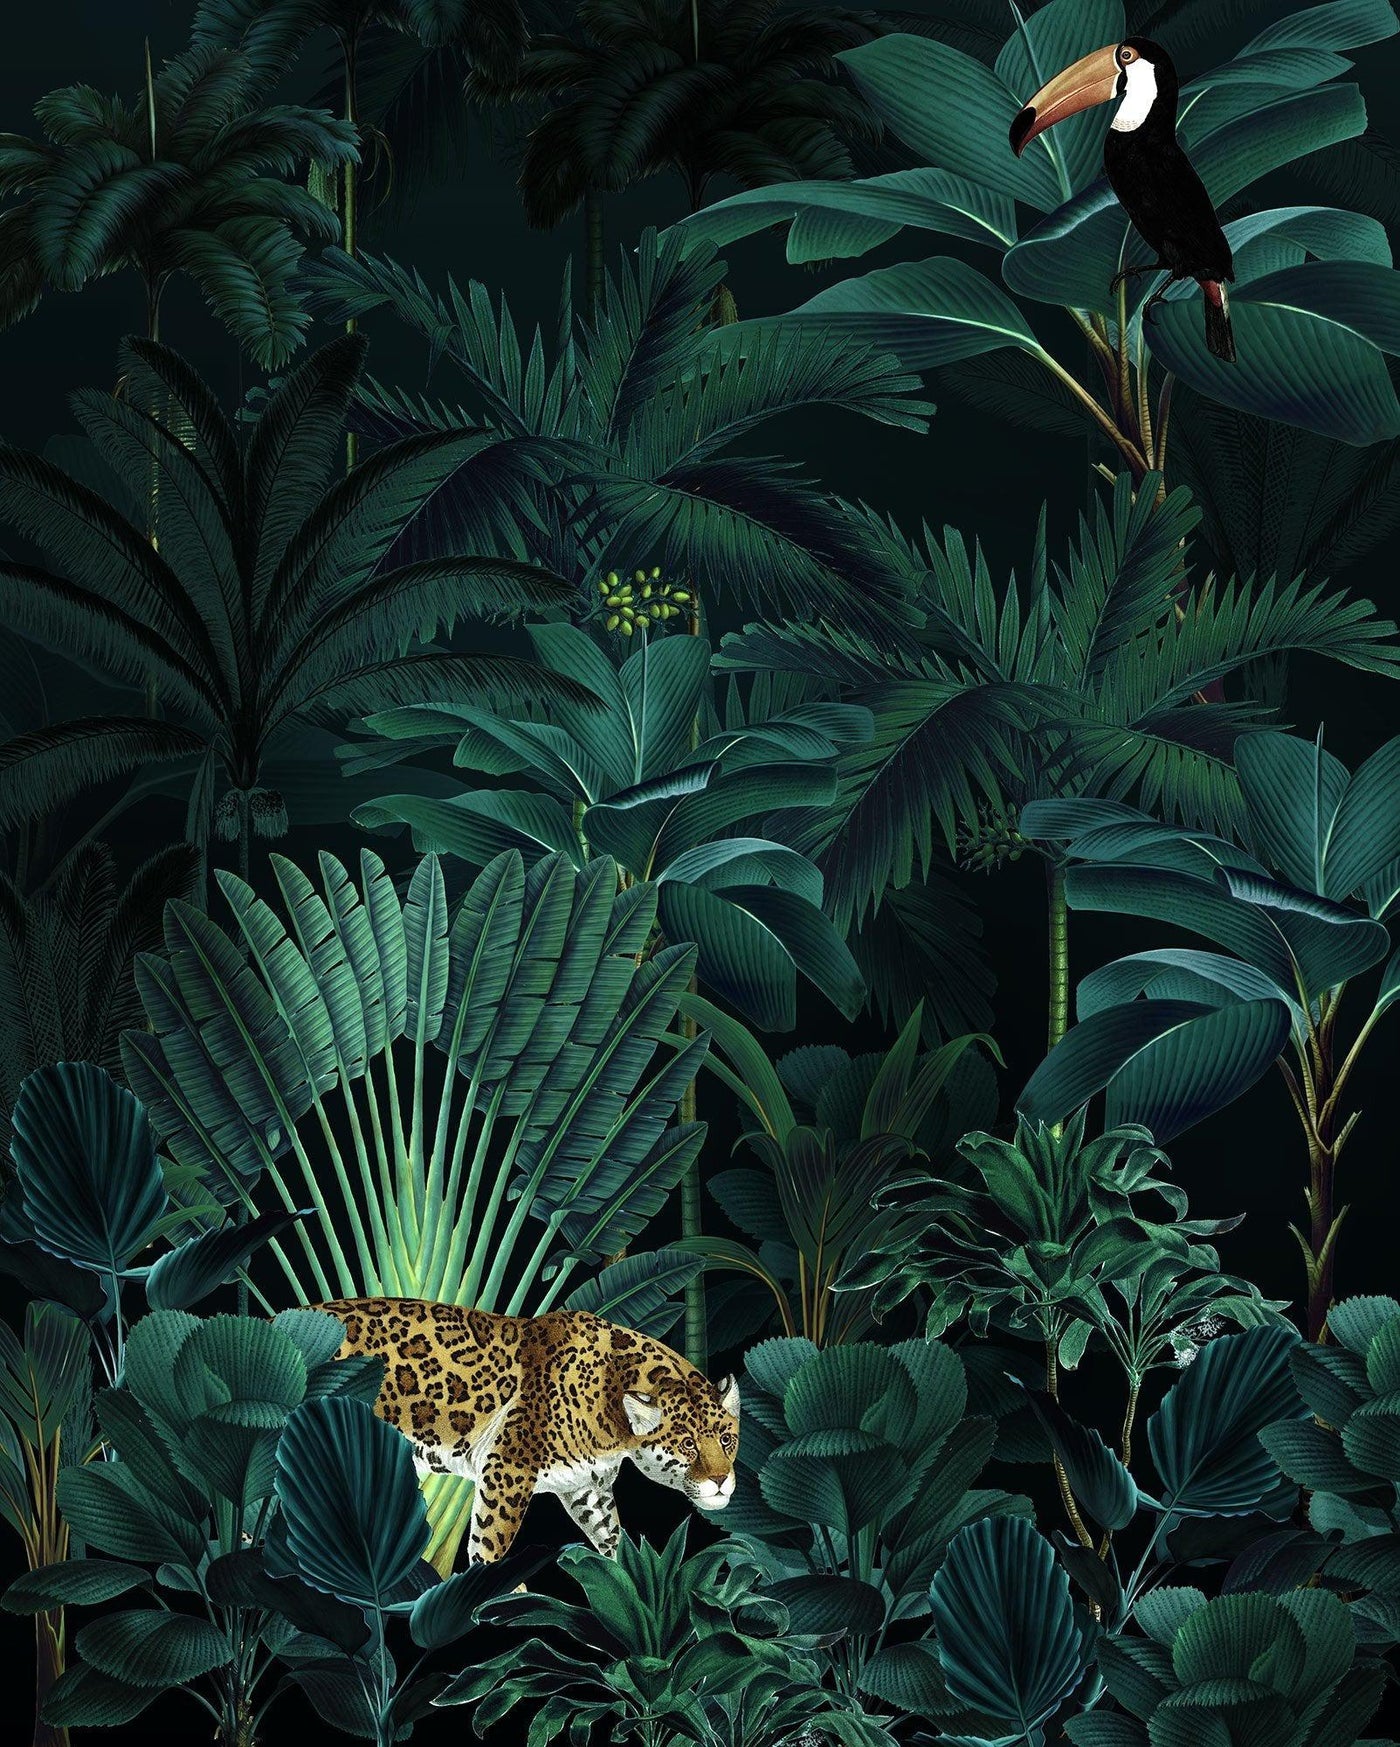 Jungle at Midnight Mural Wallpaper-Wall Decor-ECO MURALS, JUNGLE WALLPAPER, MURALS, MURALS / WALLPAPERS, NON-WOVEN WALLPAPER, TROPICAL MURAL, TROPICAL WALLPAPERS-Forest Homes-Nature inspired decor-Nature decor